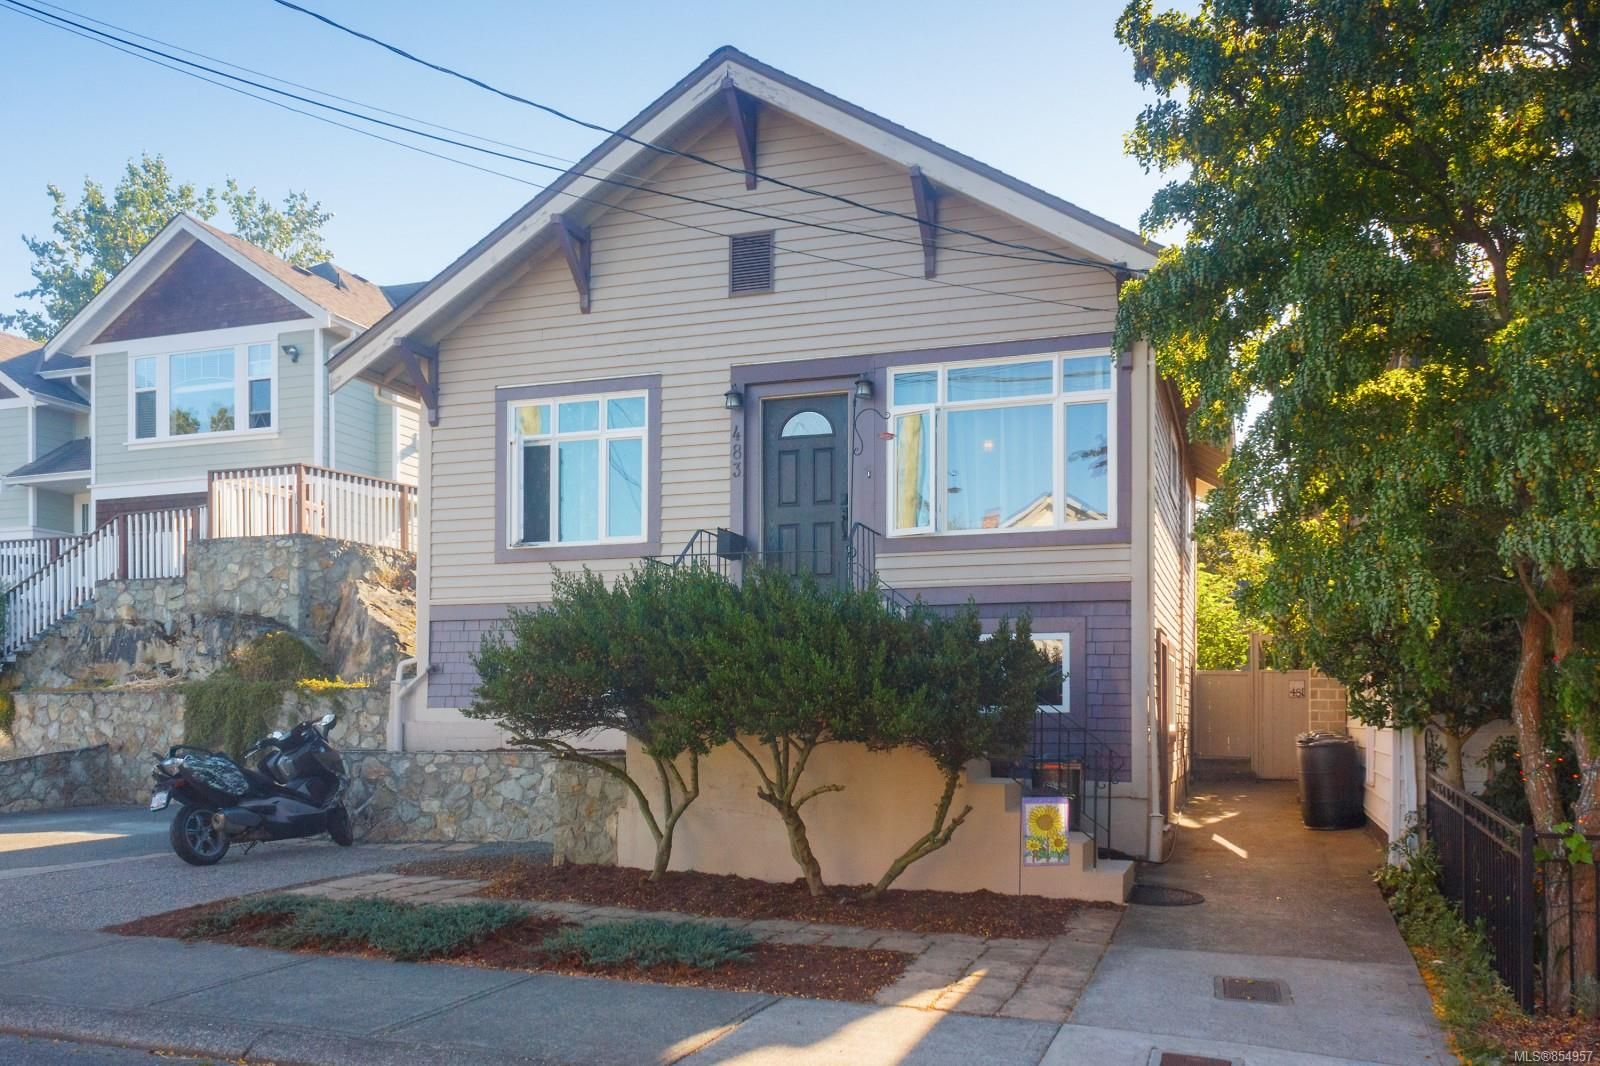 I have sold a property at 483 Constance Ave in Esquimalt
